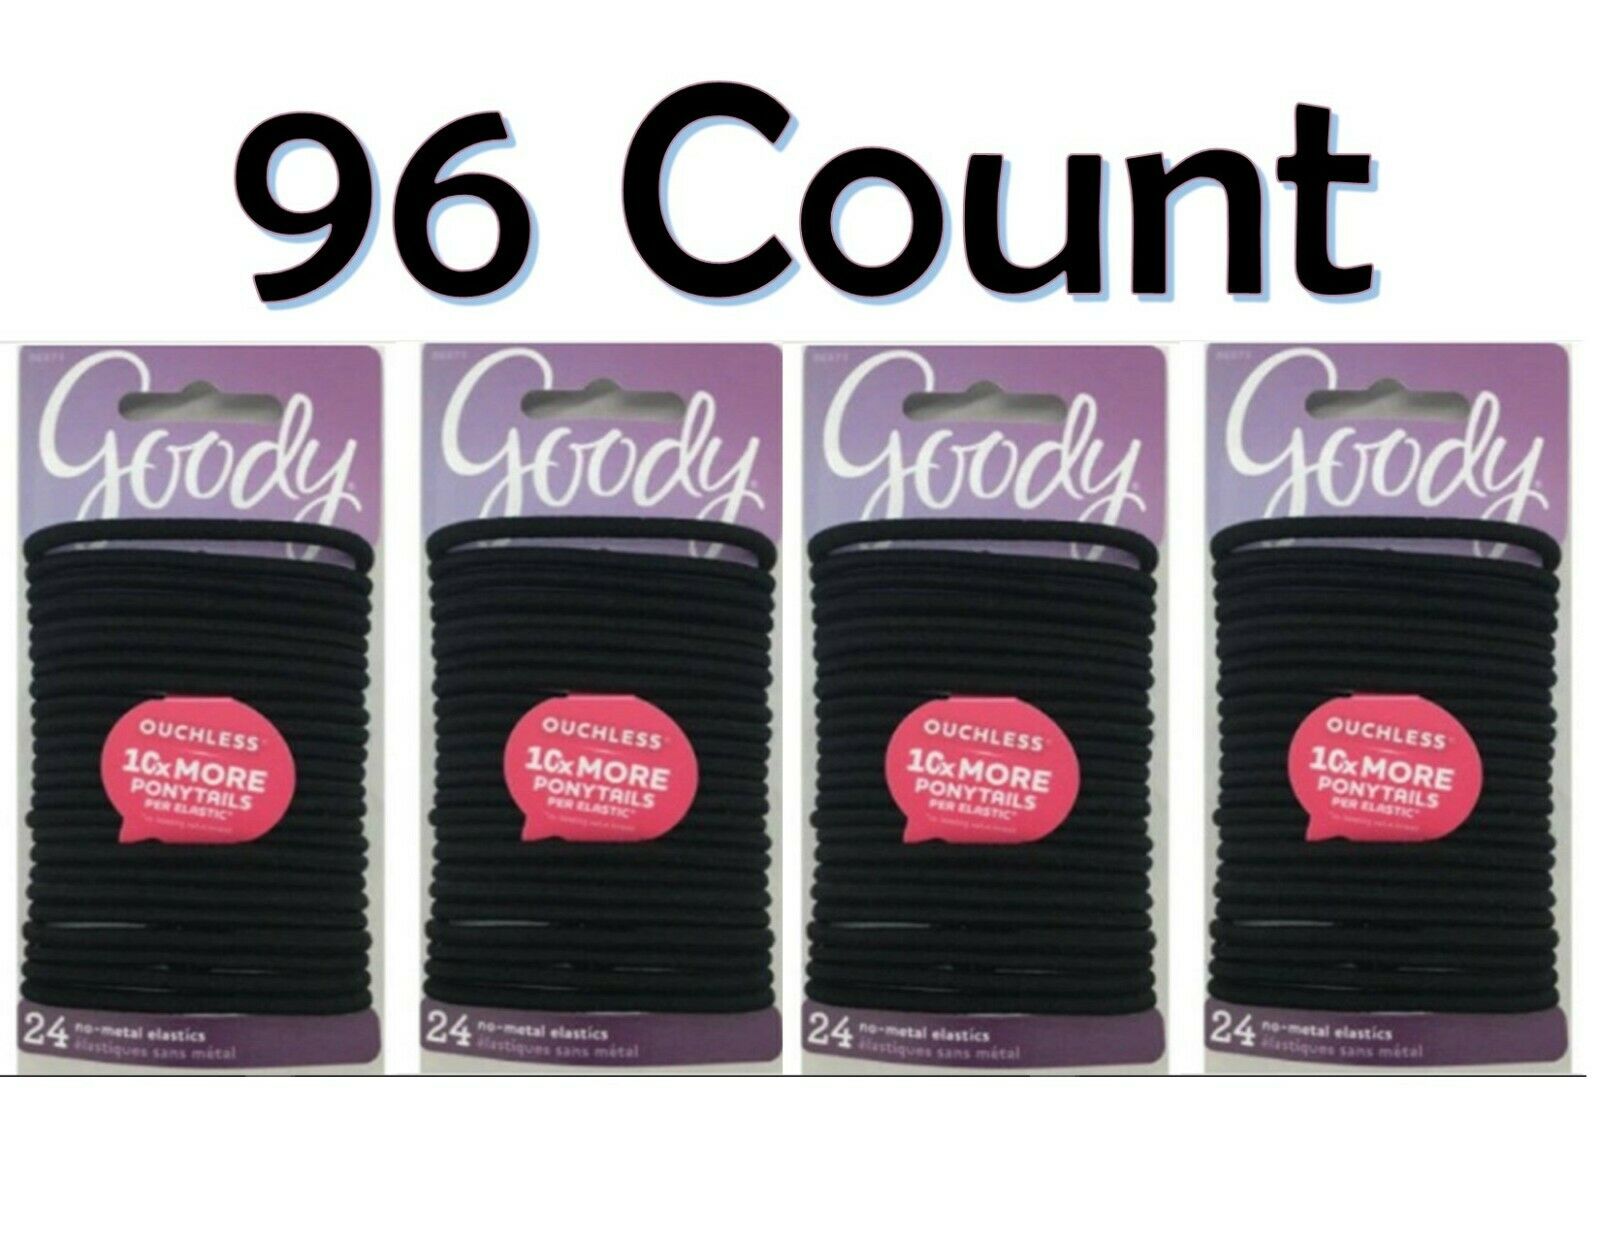 Goody Ouchless No Metal Hair Ties Elastics Pony Tail 96 Count Black